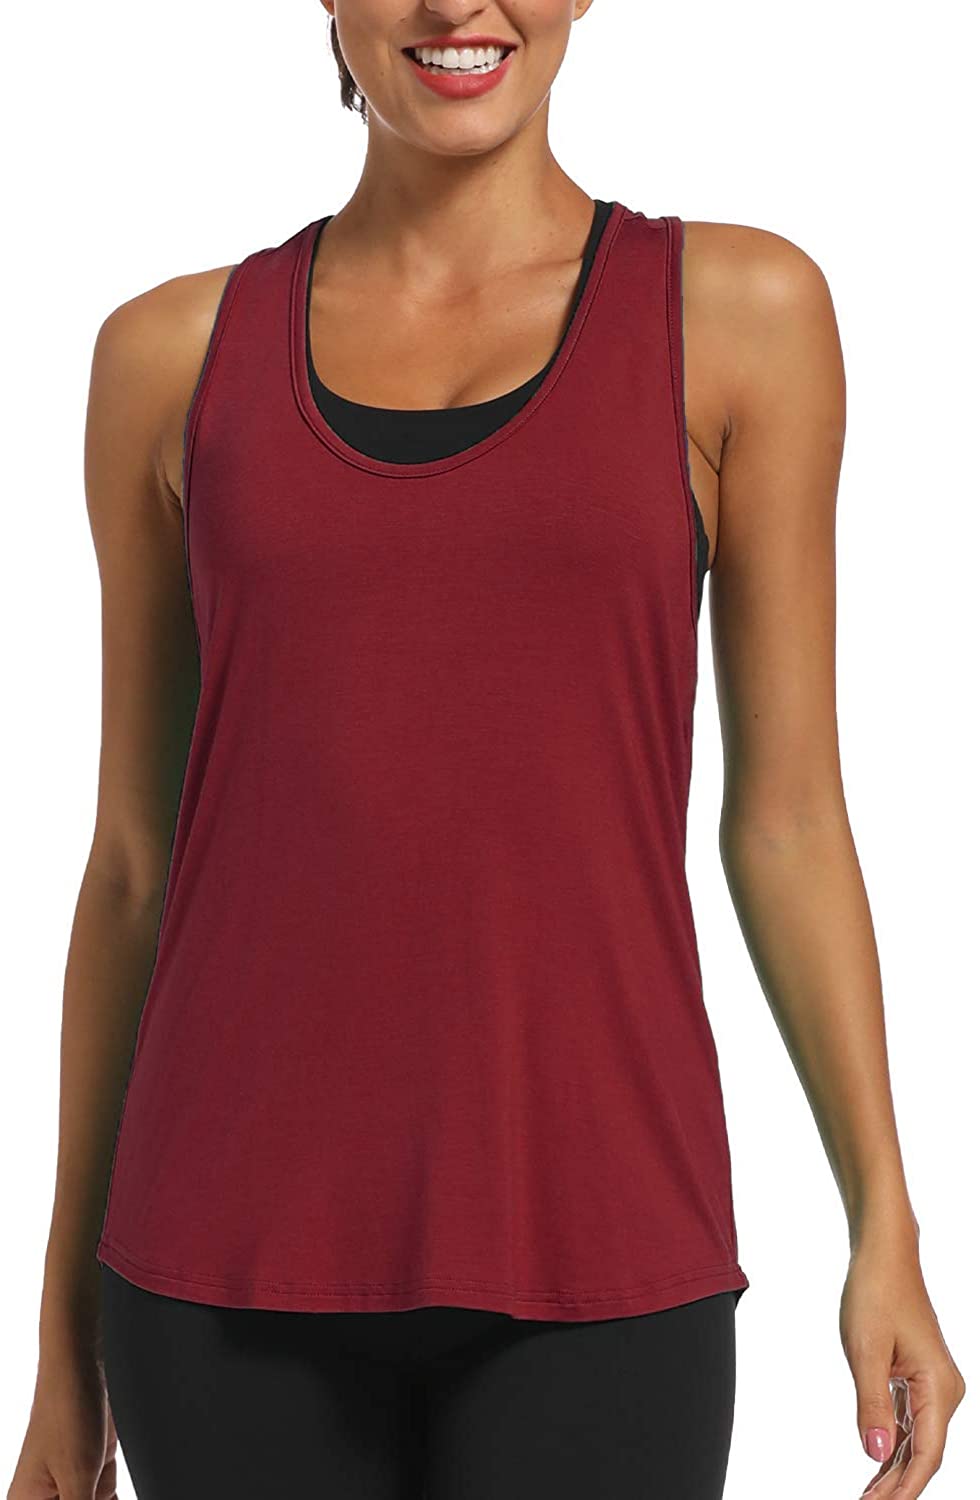  Red Workout Tank for Gym